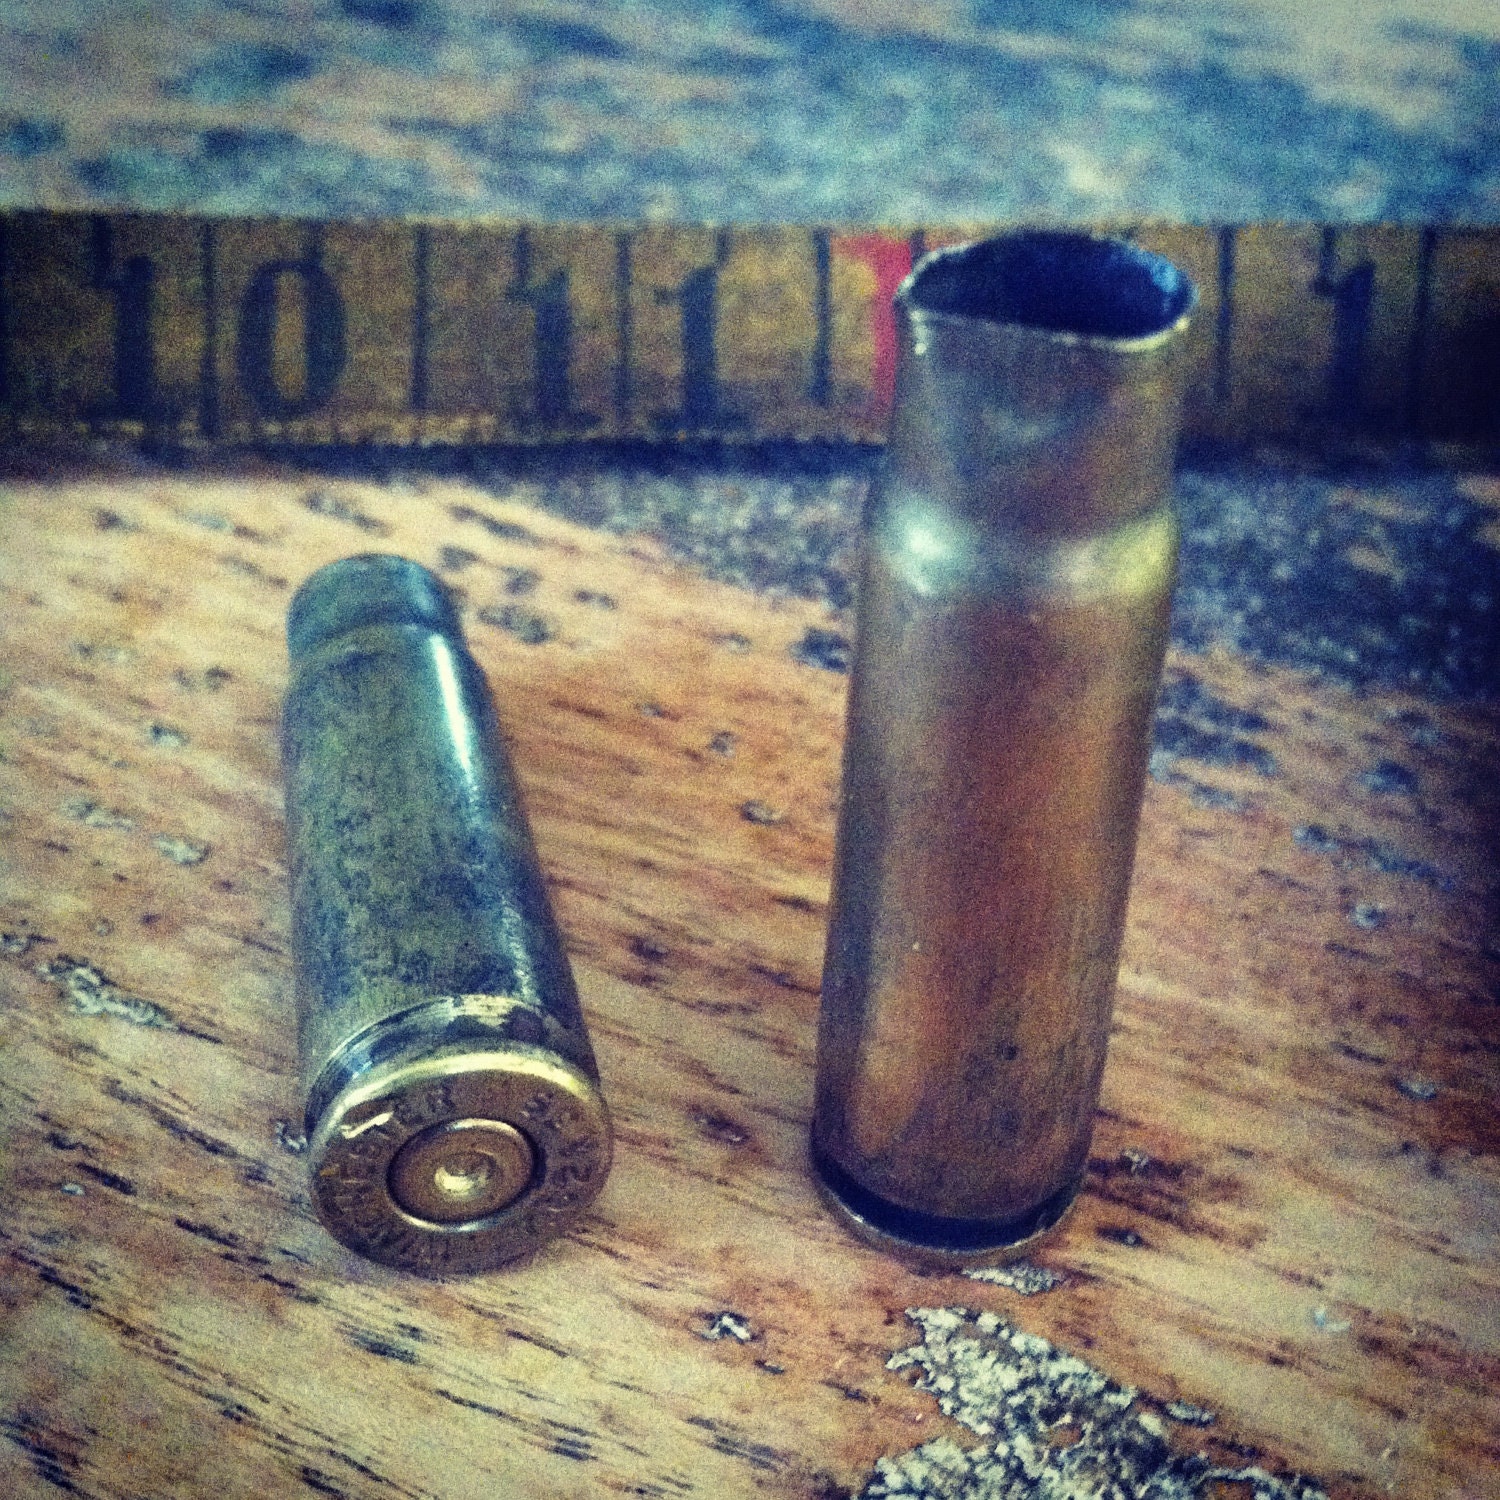 bullet rounds